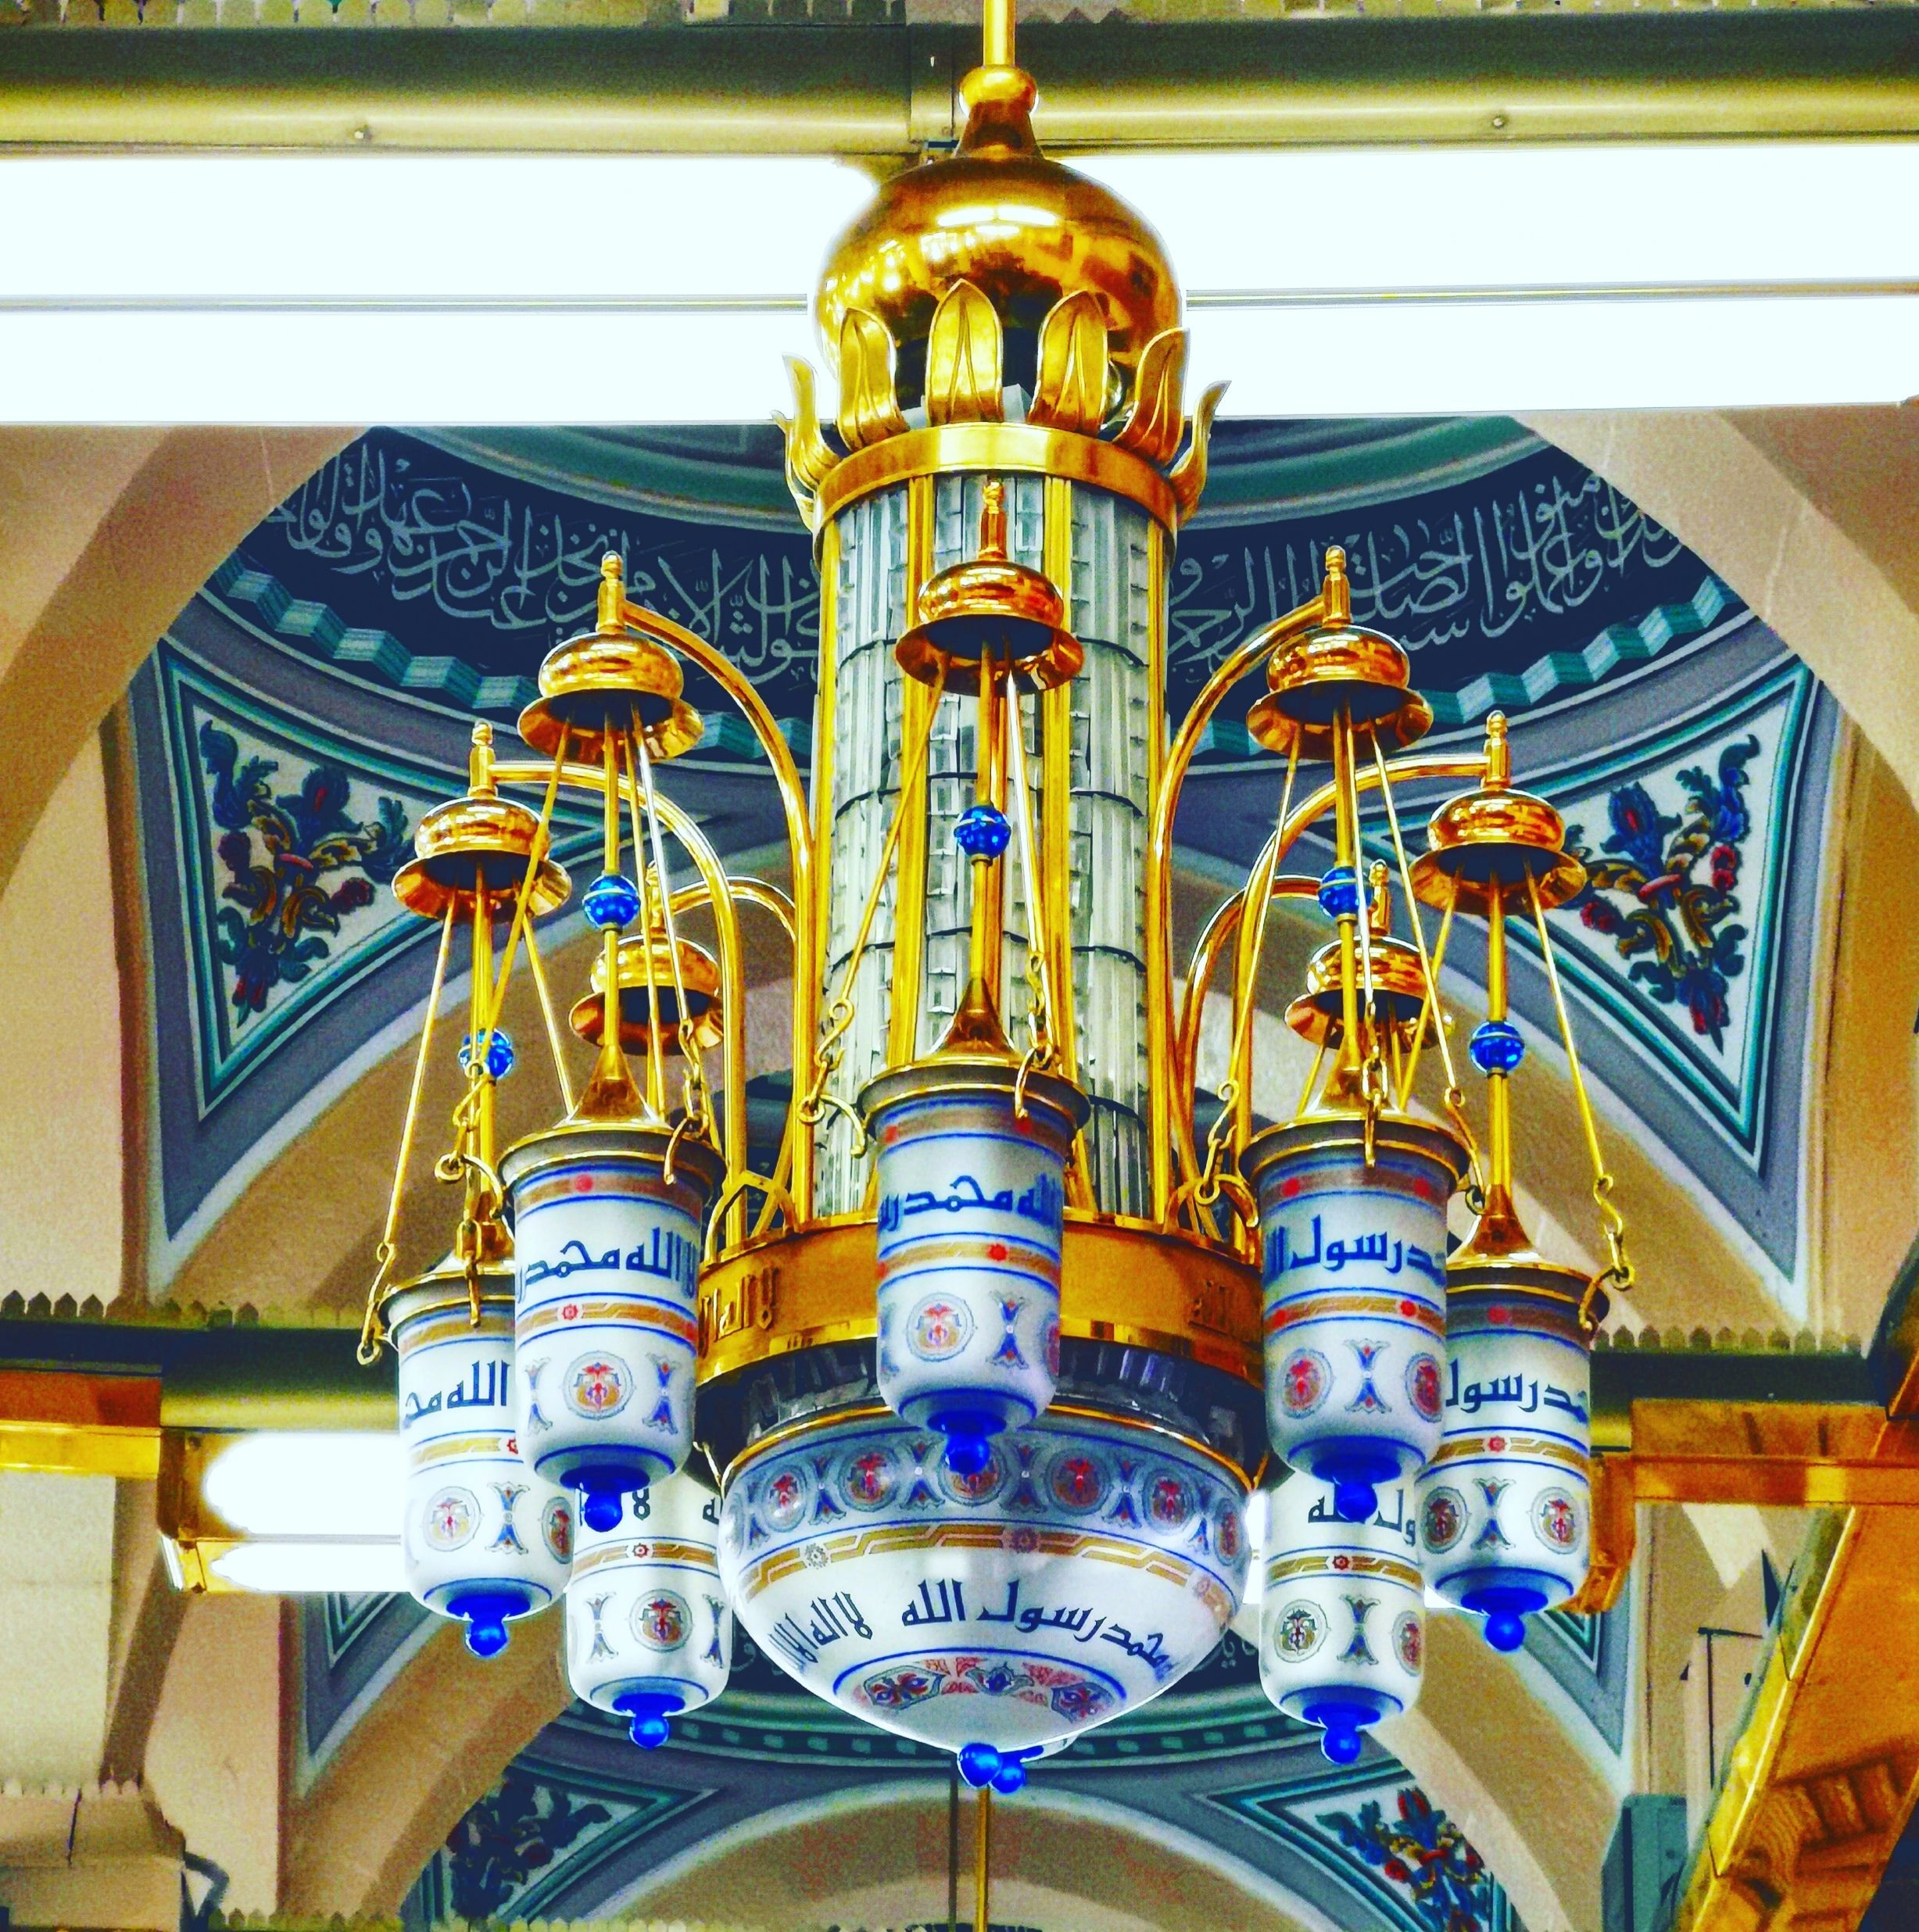 Giant Islamic chandeliers in the roof of the mosque.